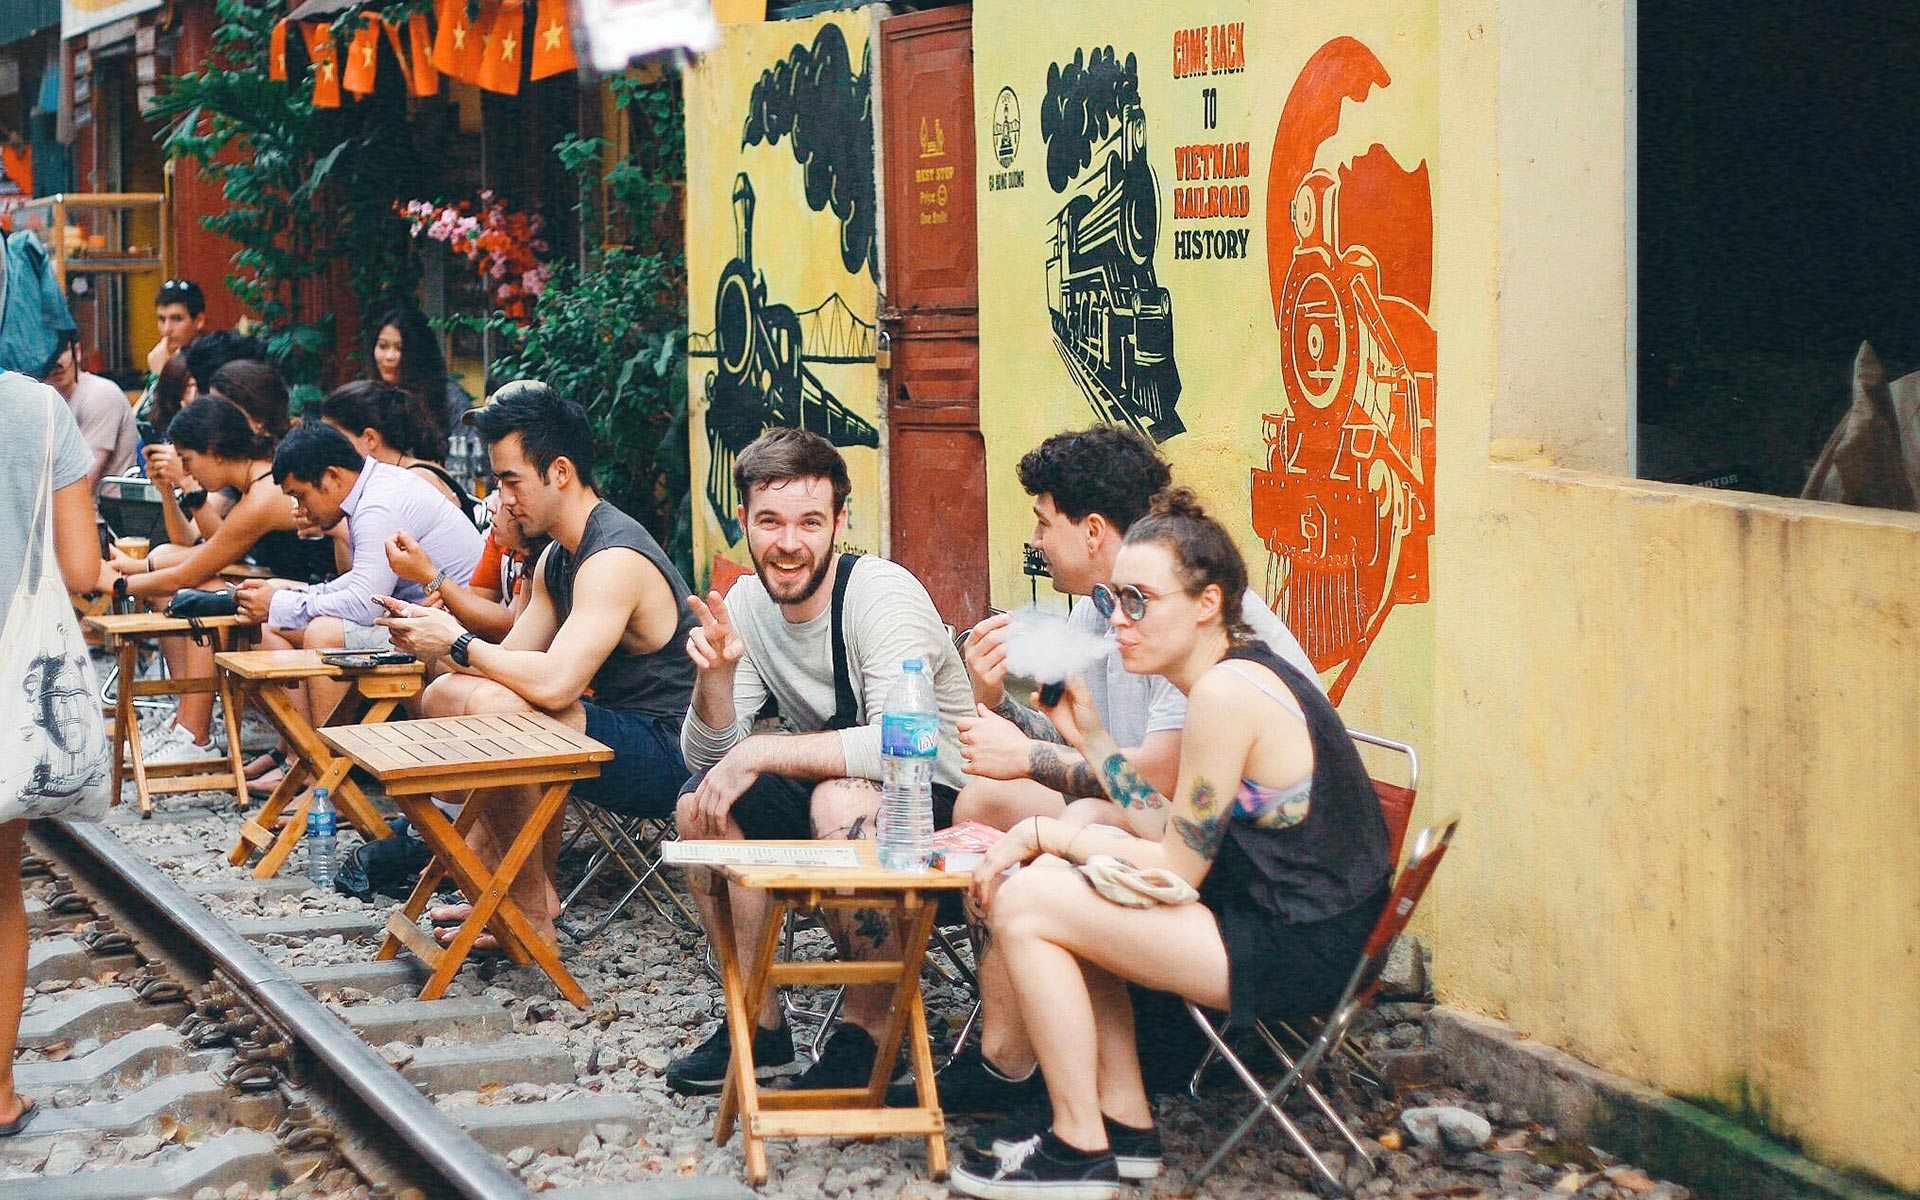 Dealing with culture shock when traveling to Southeast Asia